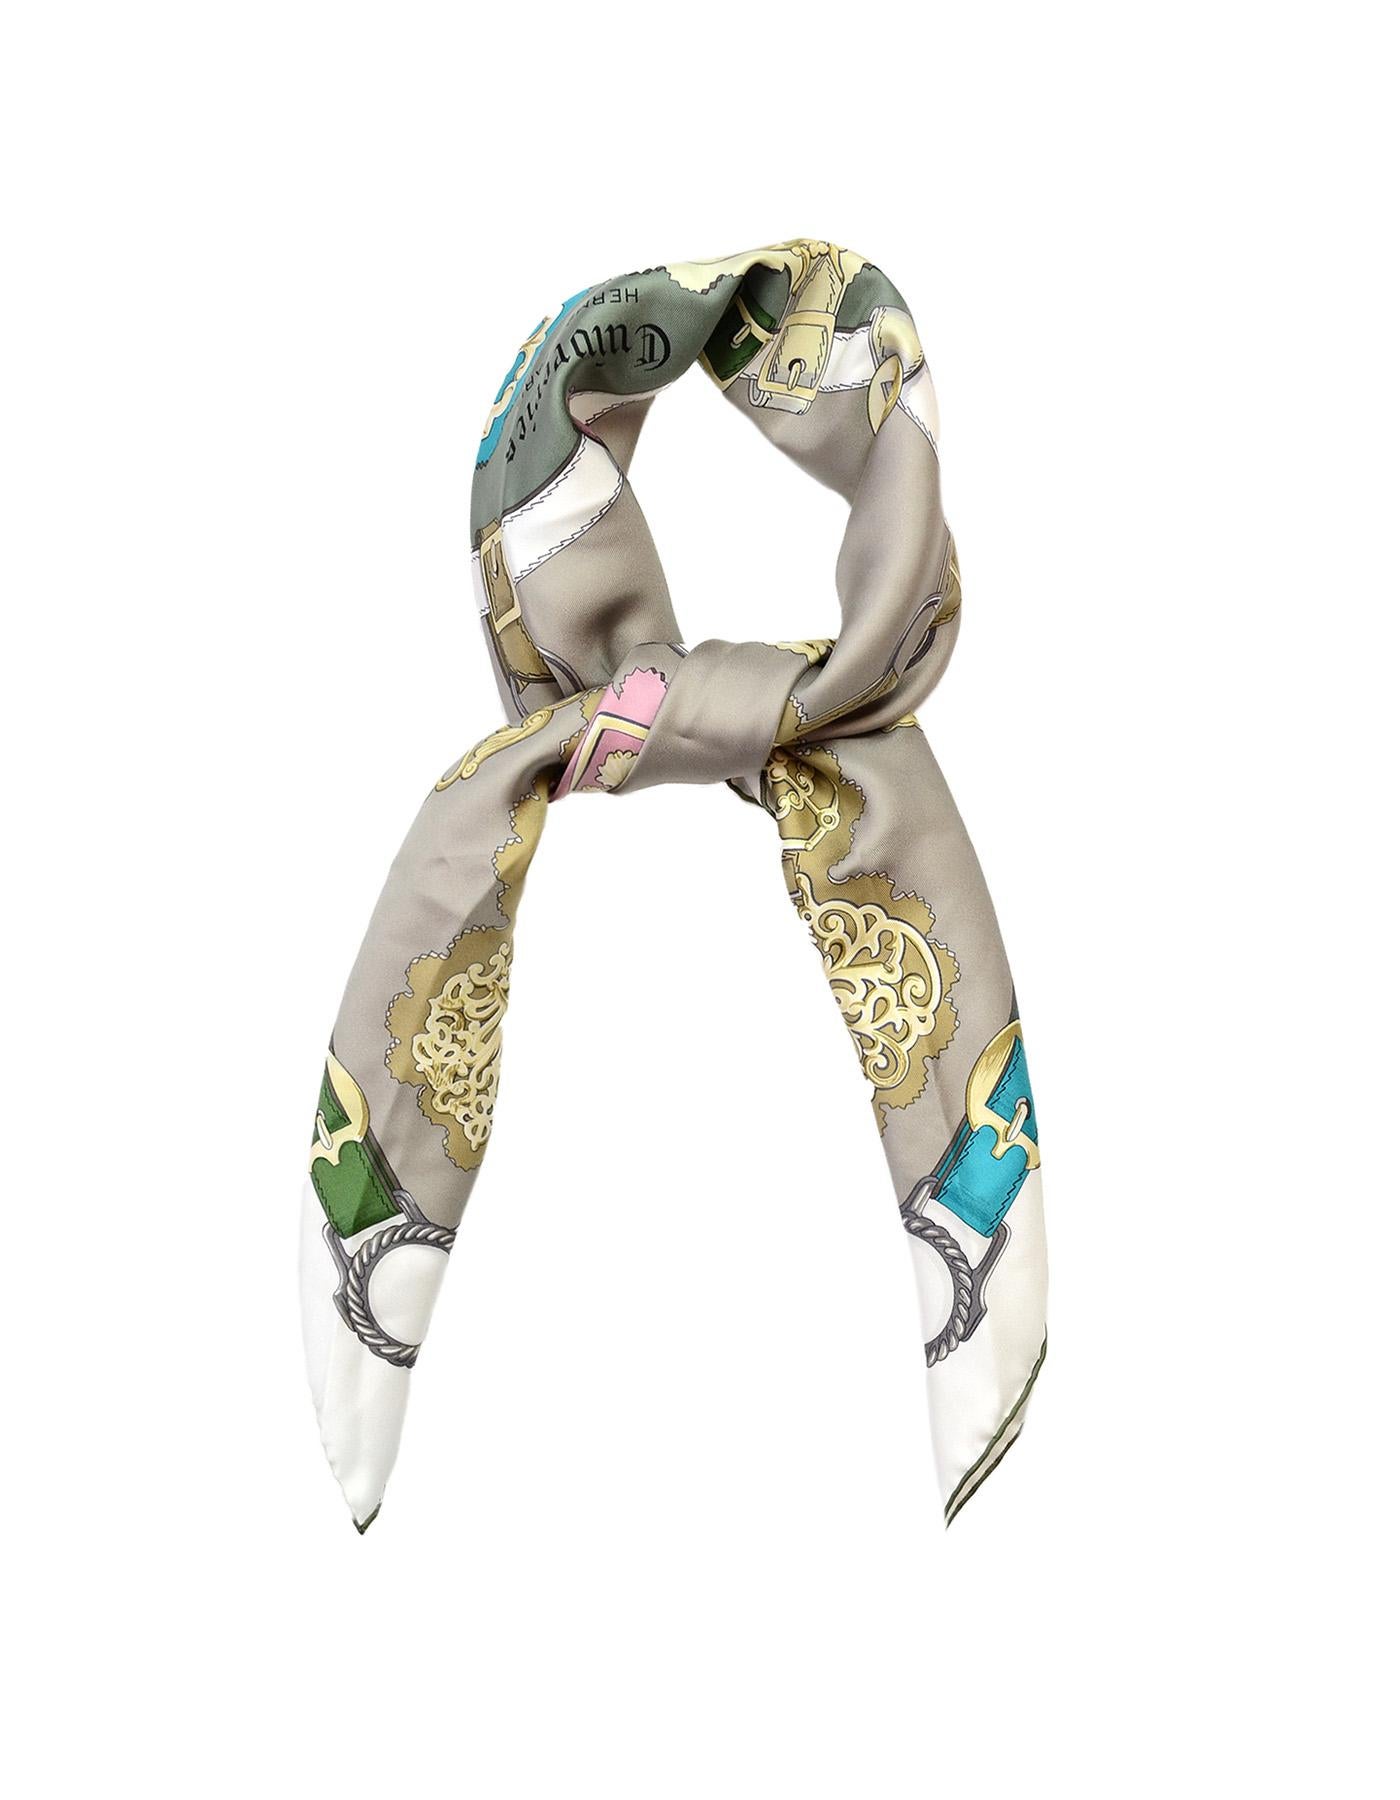 Hermes Grey/Multi-Color Cuivreries Buckle Print 90CM Silk Scarf W/ Box

Made In: France
Color: Grey and multi-color
Materials: 100% silk
Overall Condition: Excellent pre-owned condition
Estimated Retail: $395 + tax
Includes: Hermes